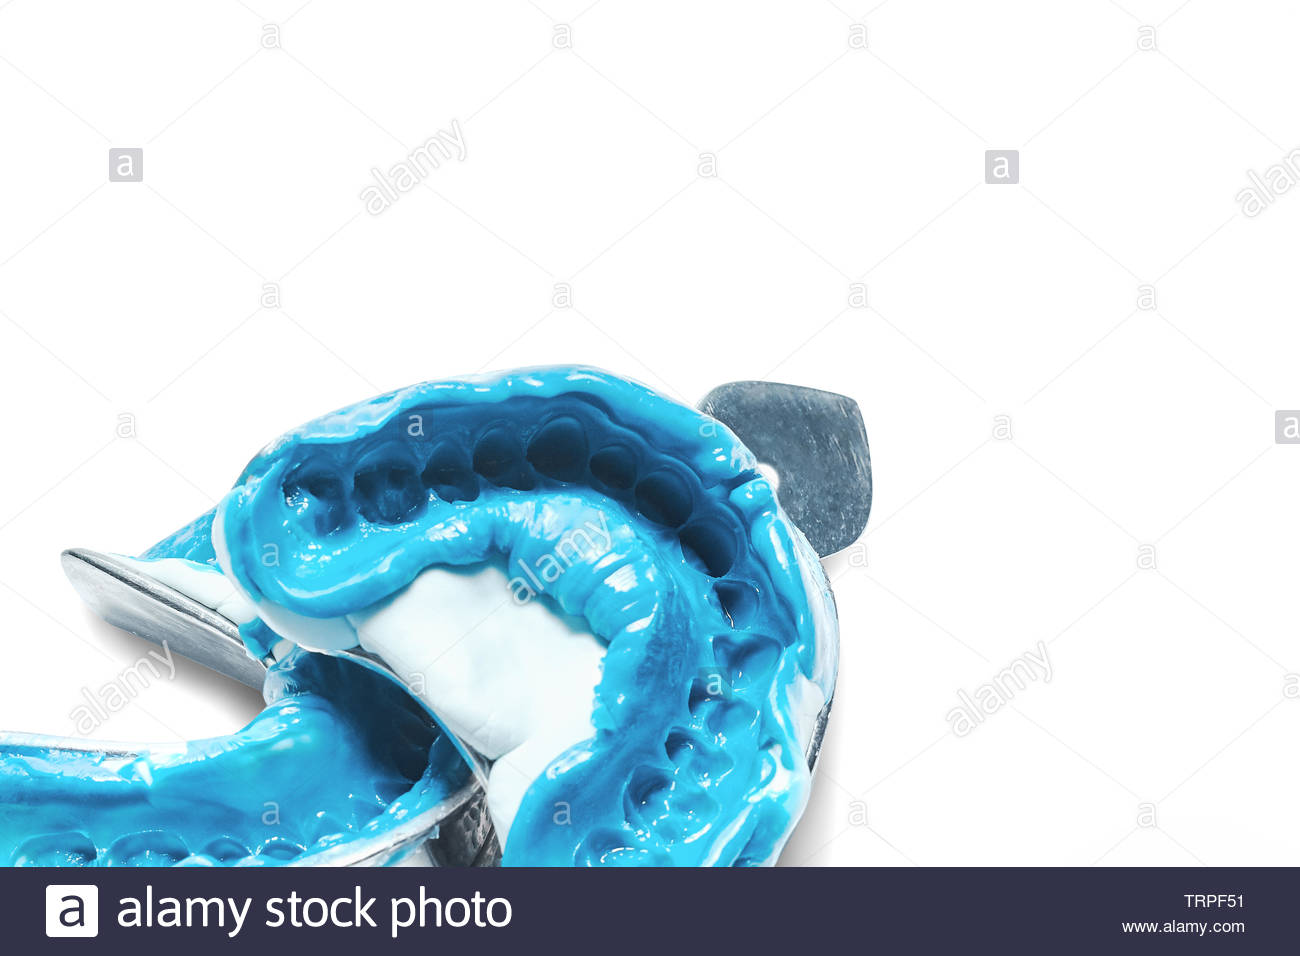 Two Dental Impressions On A White Background With Copy Space